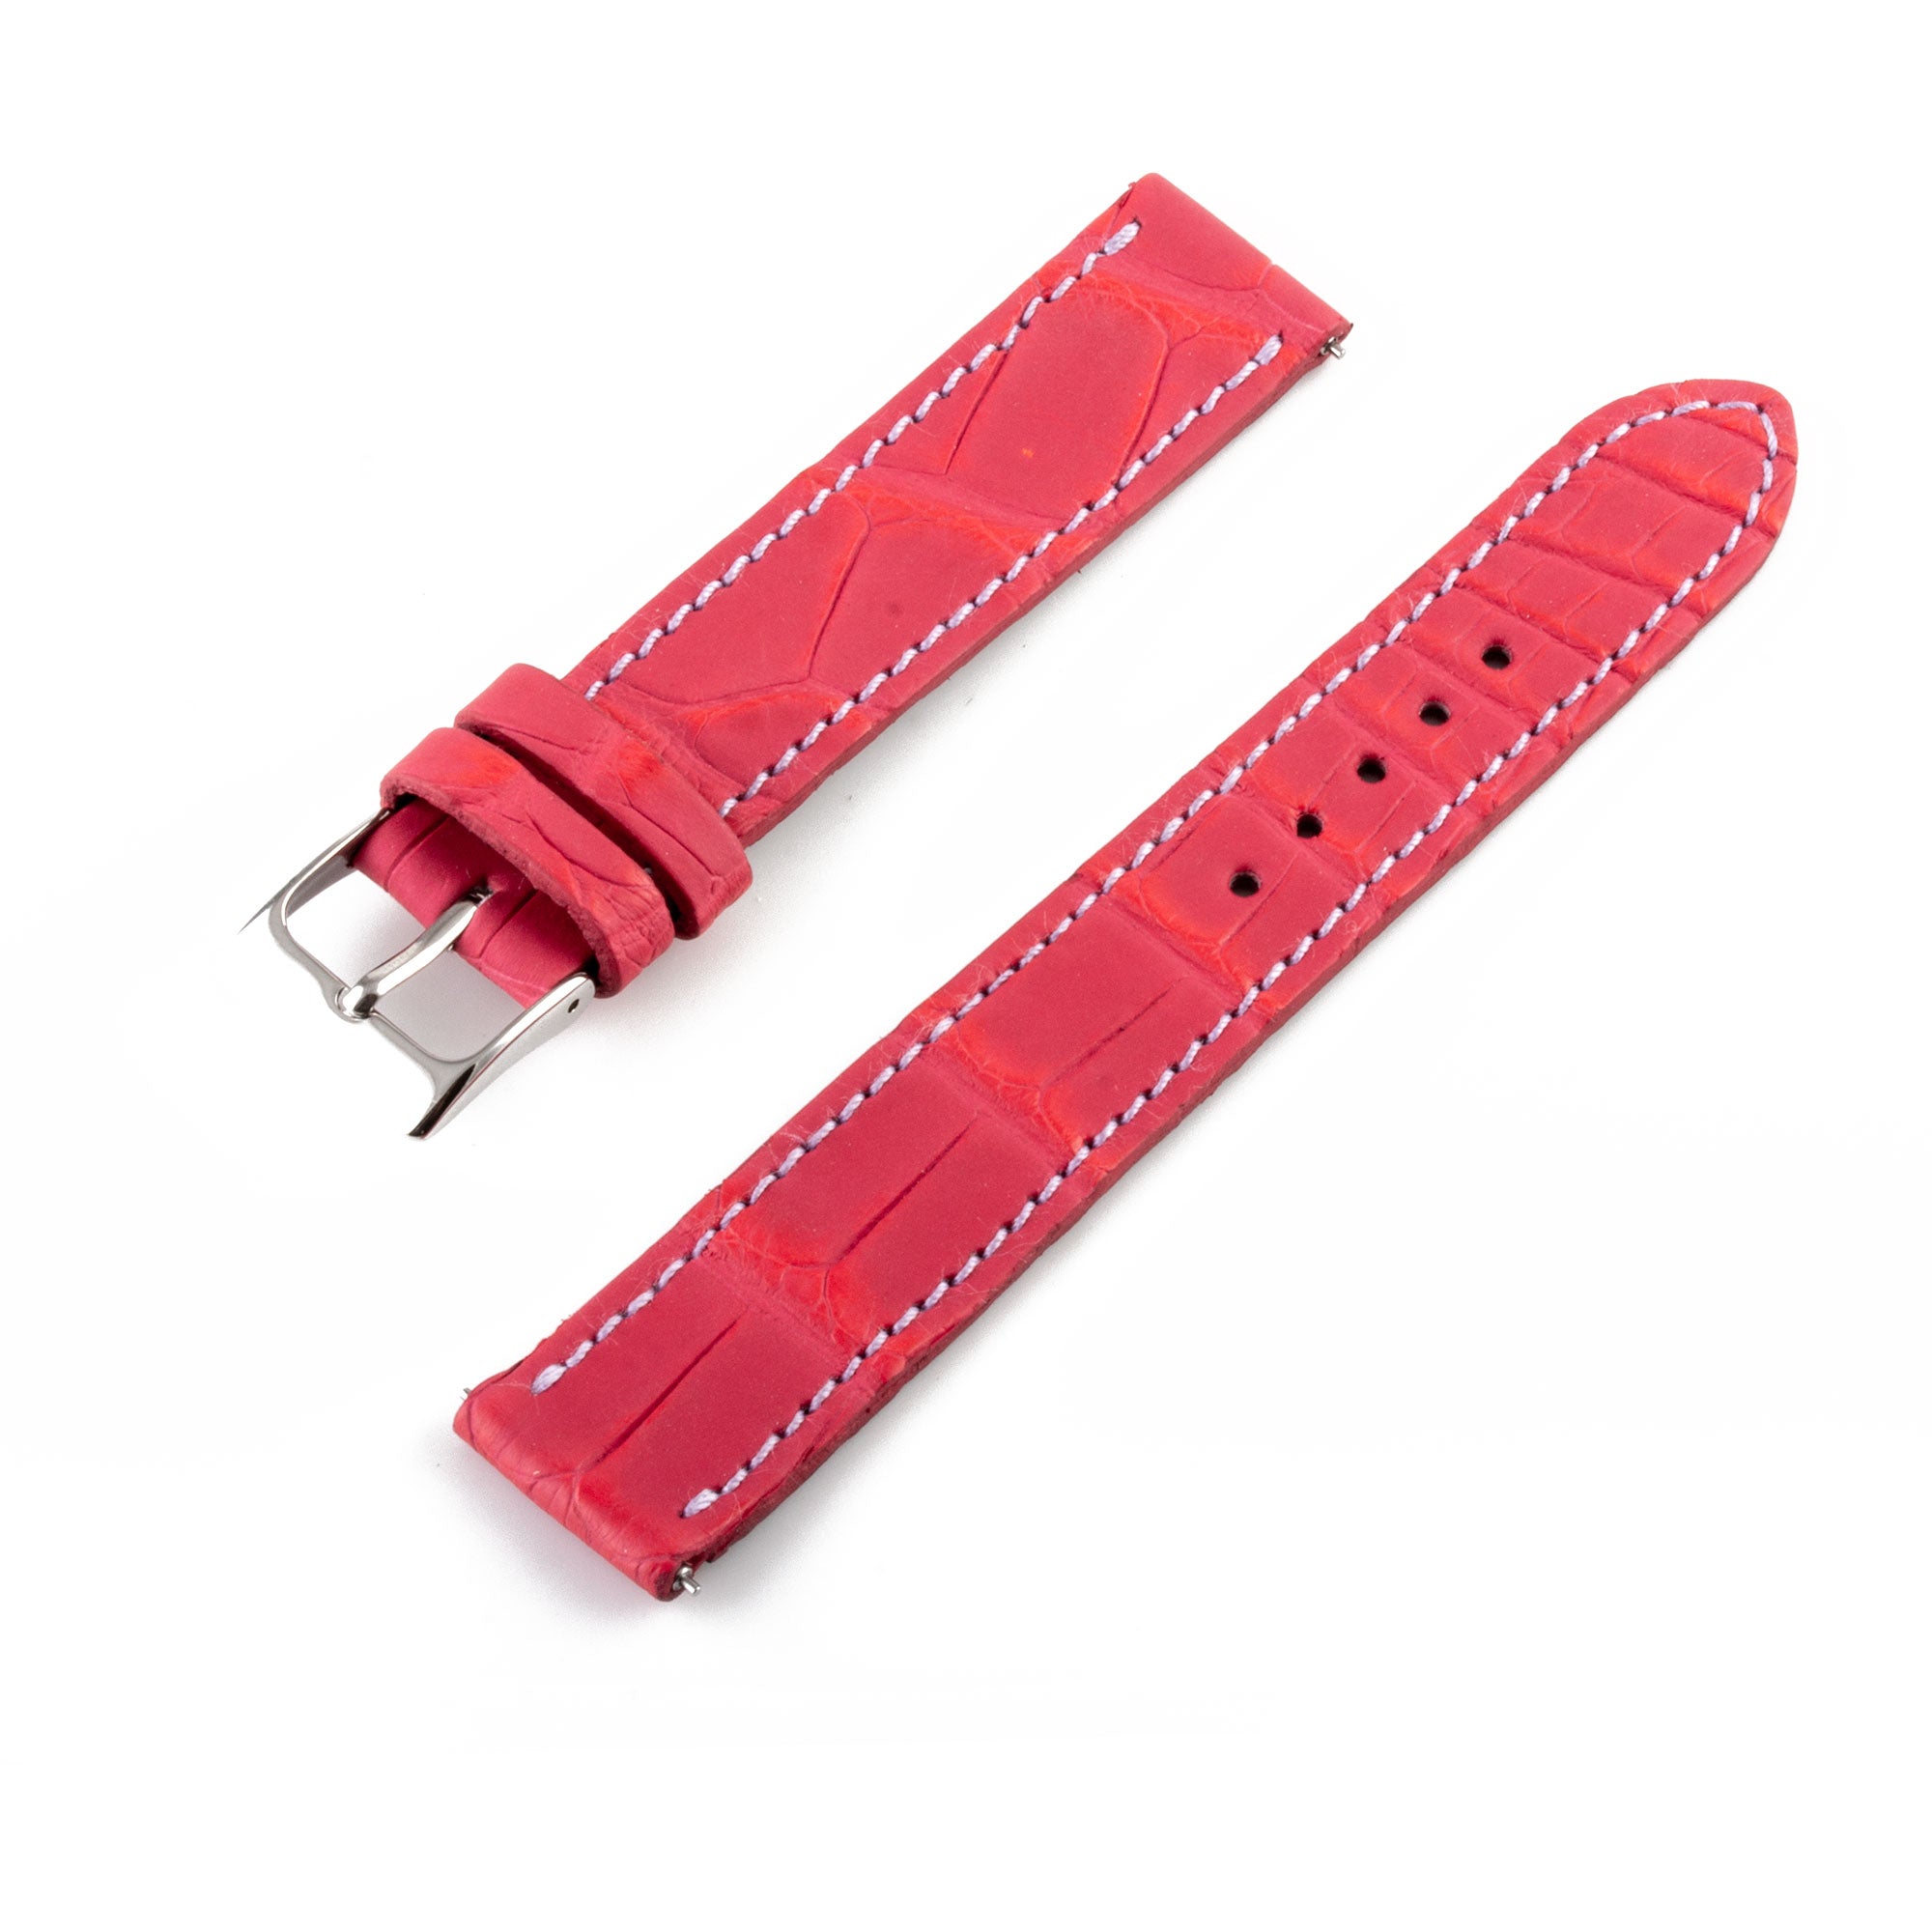 Alligator "Solo" leather watch band - 17mm width (0.67 inches) / Size M (n° 4)